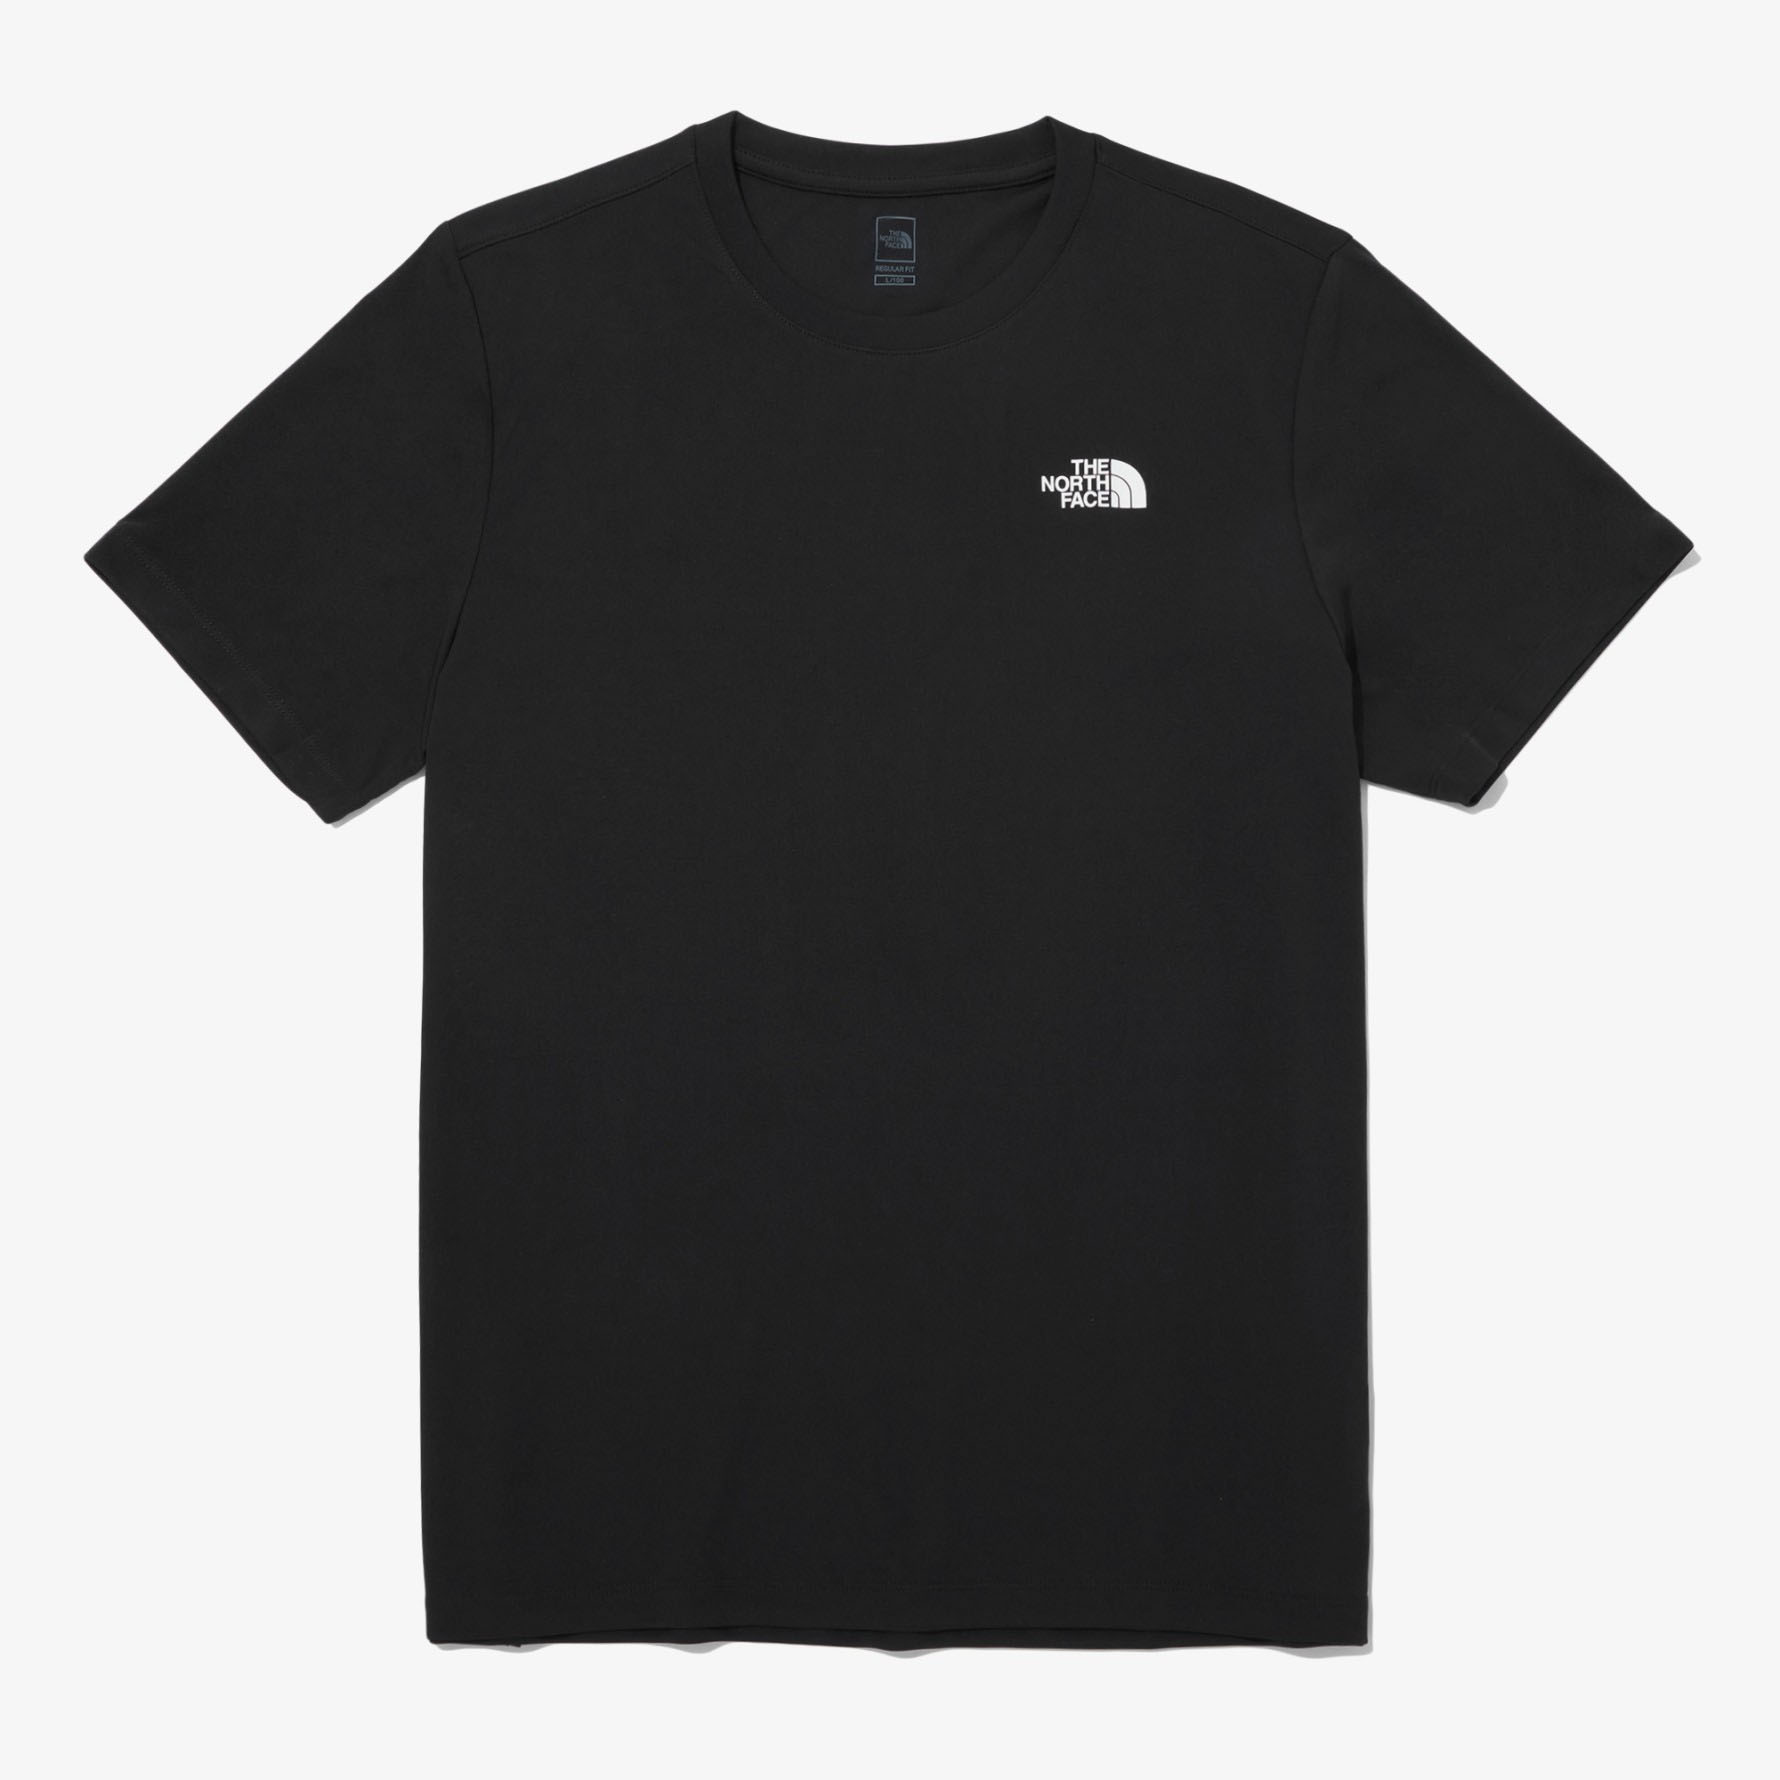 THE NORTH FACE Tシャツ M'S RECOVERY S/S R/TEE リカバリー 半袖Tシャツ ロゴT ベーシックフィット NAVY KHAKI CHARCOAL BLUE BLACK 半袖 NT7UQ06A/B/C/D/E｜a-dot｜06